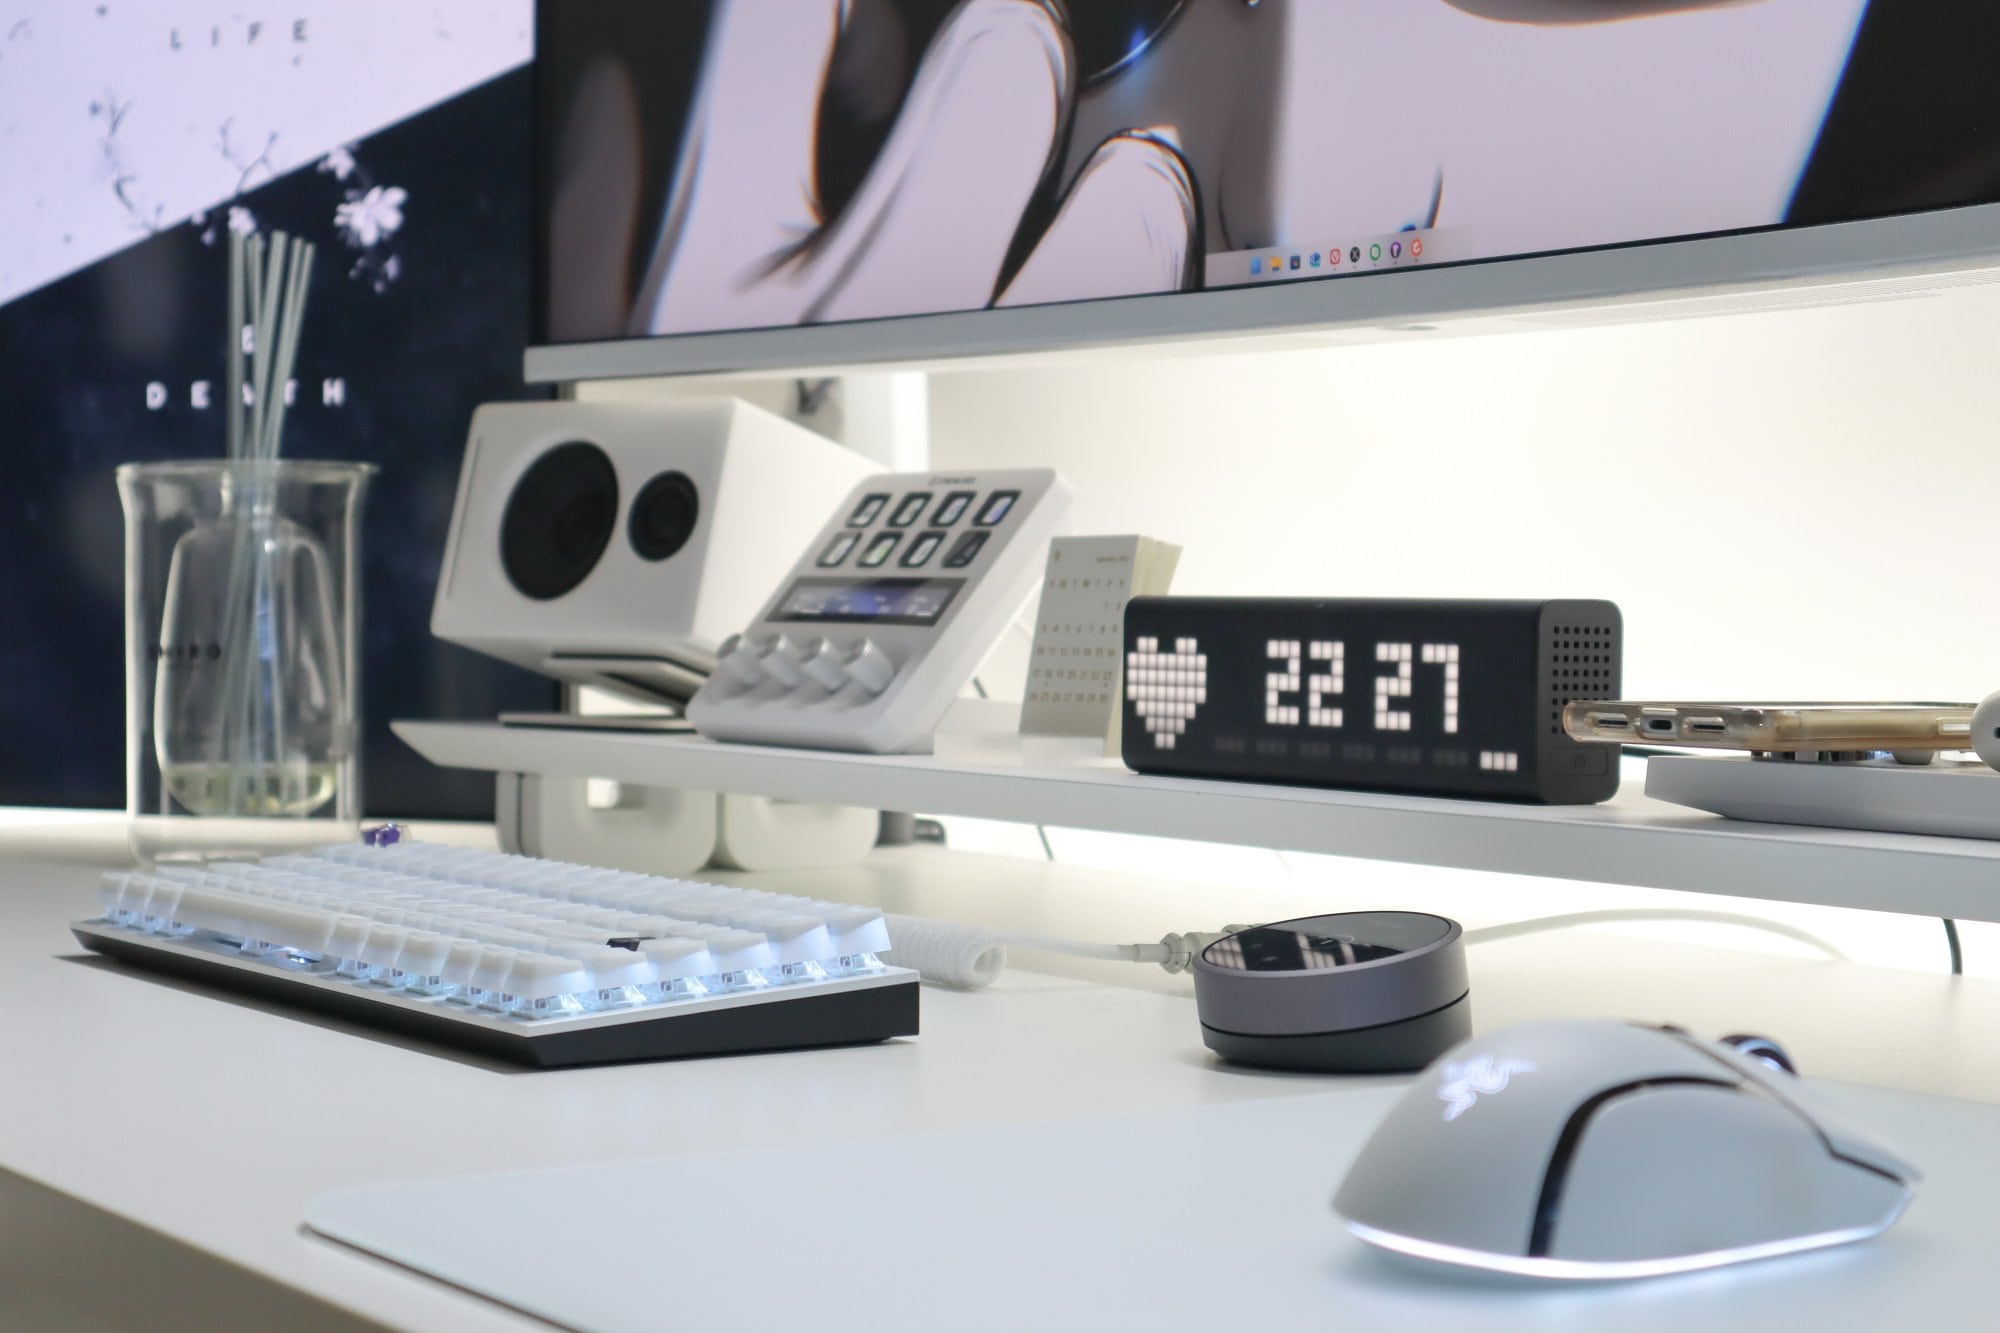 A close-up of a modern desk setup, highlighting a mechanical keyboard with backlit keys, a high-precision gaming mouse, stereo speakers, and a digital clock displaying the time, all arranged on a clean white desk